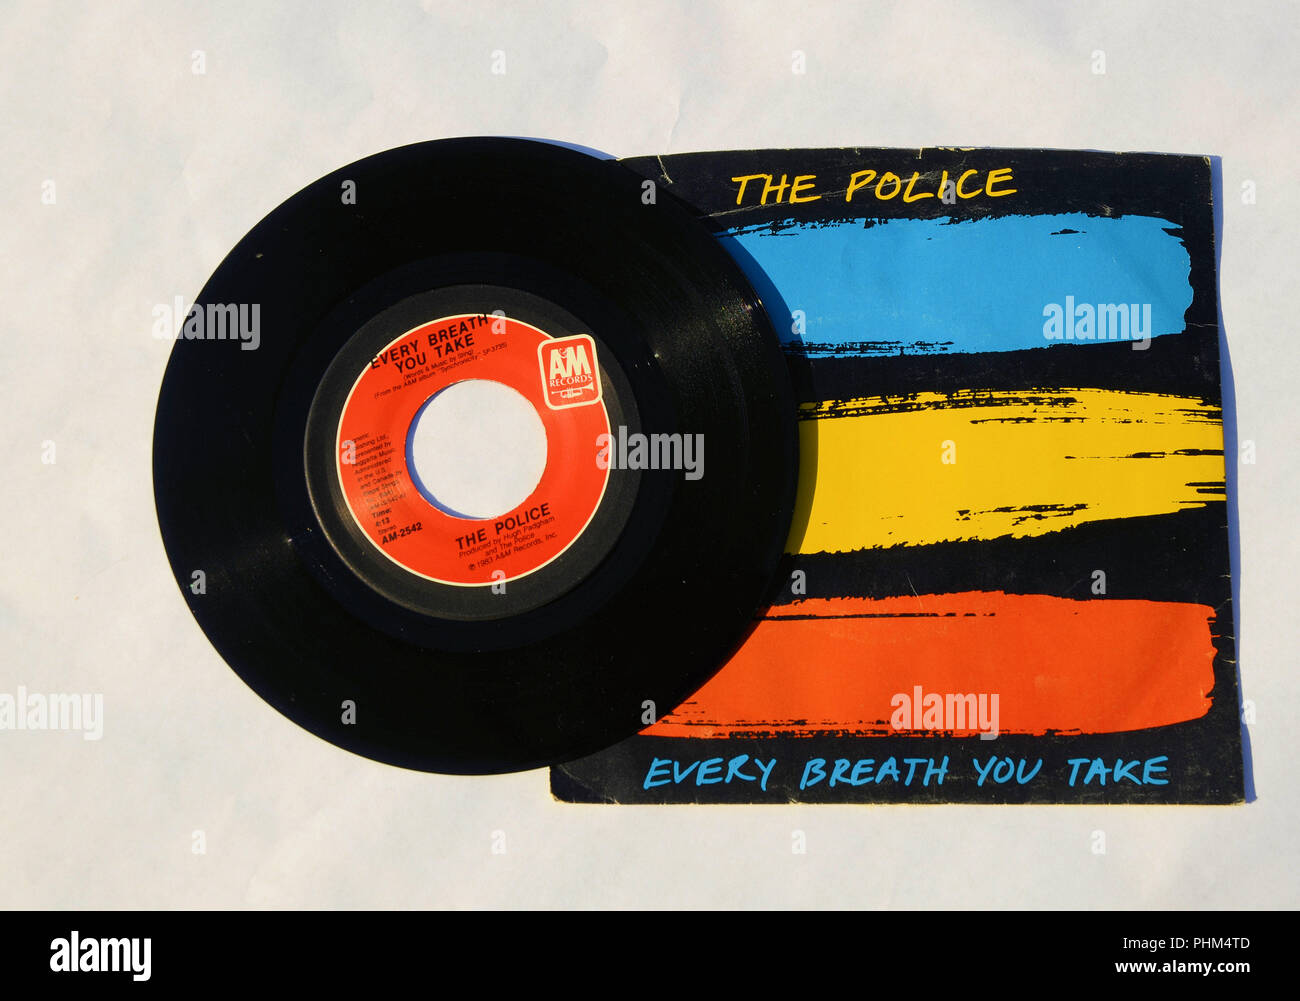 Cover and 45 RPM vinyl record of The Police's song "Every Breath You Take"  released in 1983 by A&M Records Stock Photo - Alamy